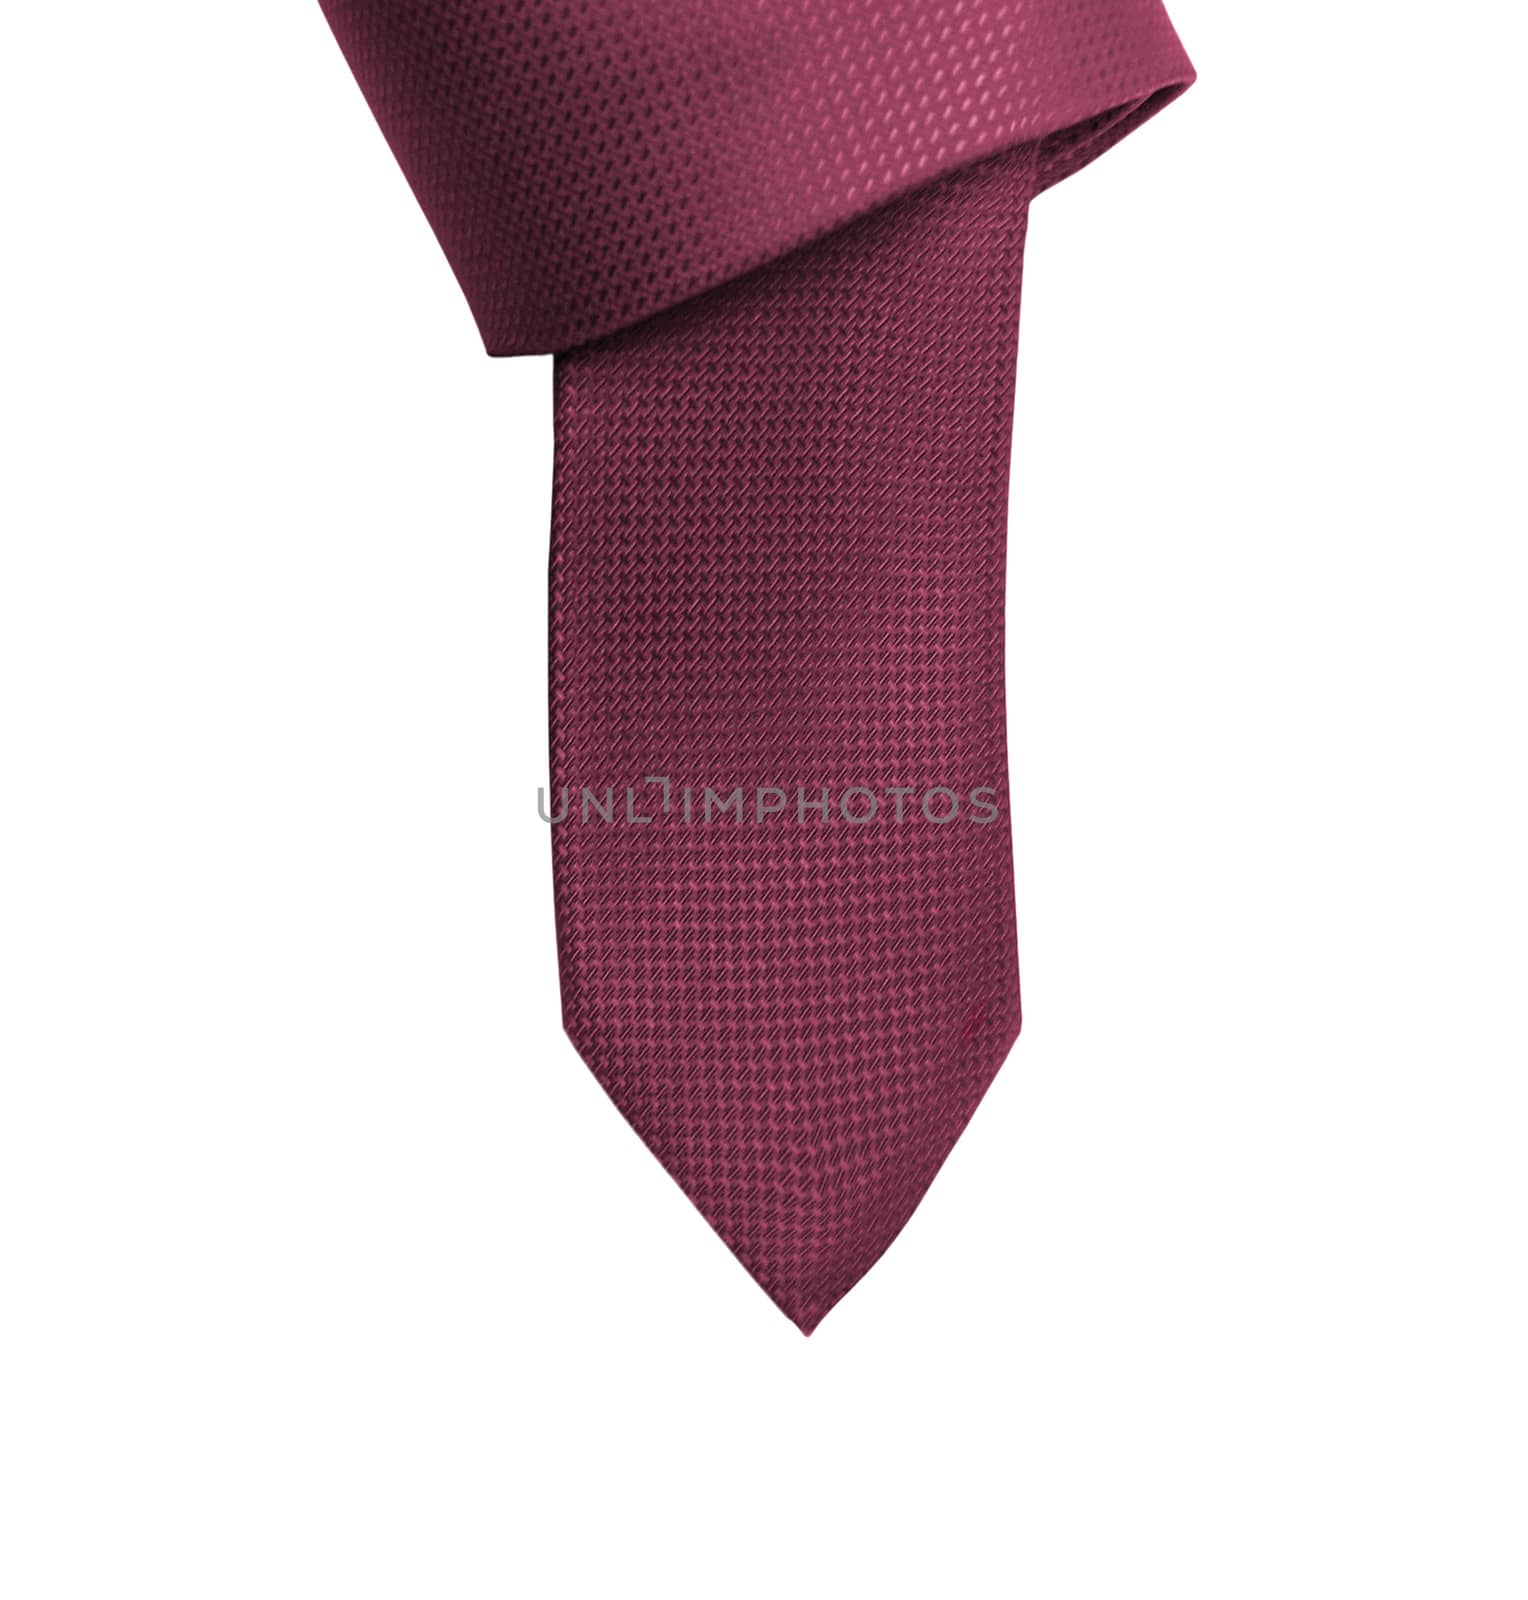 red tie close up on white background